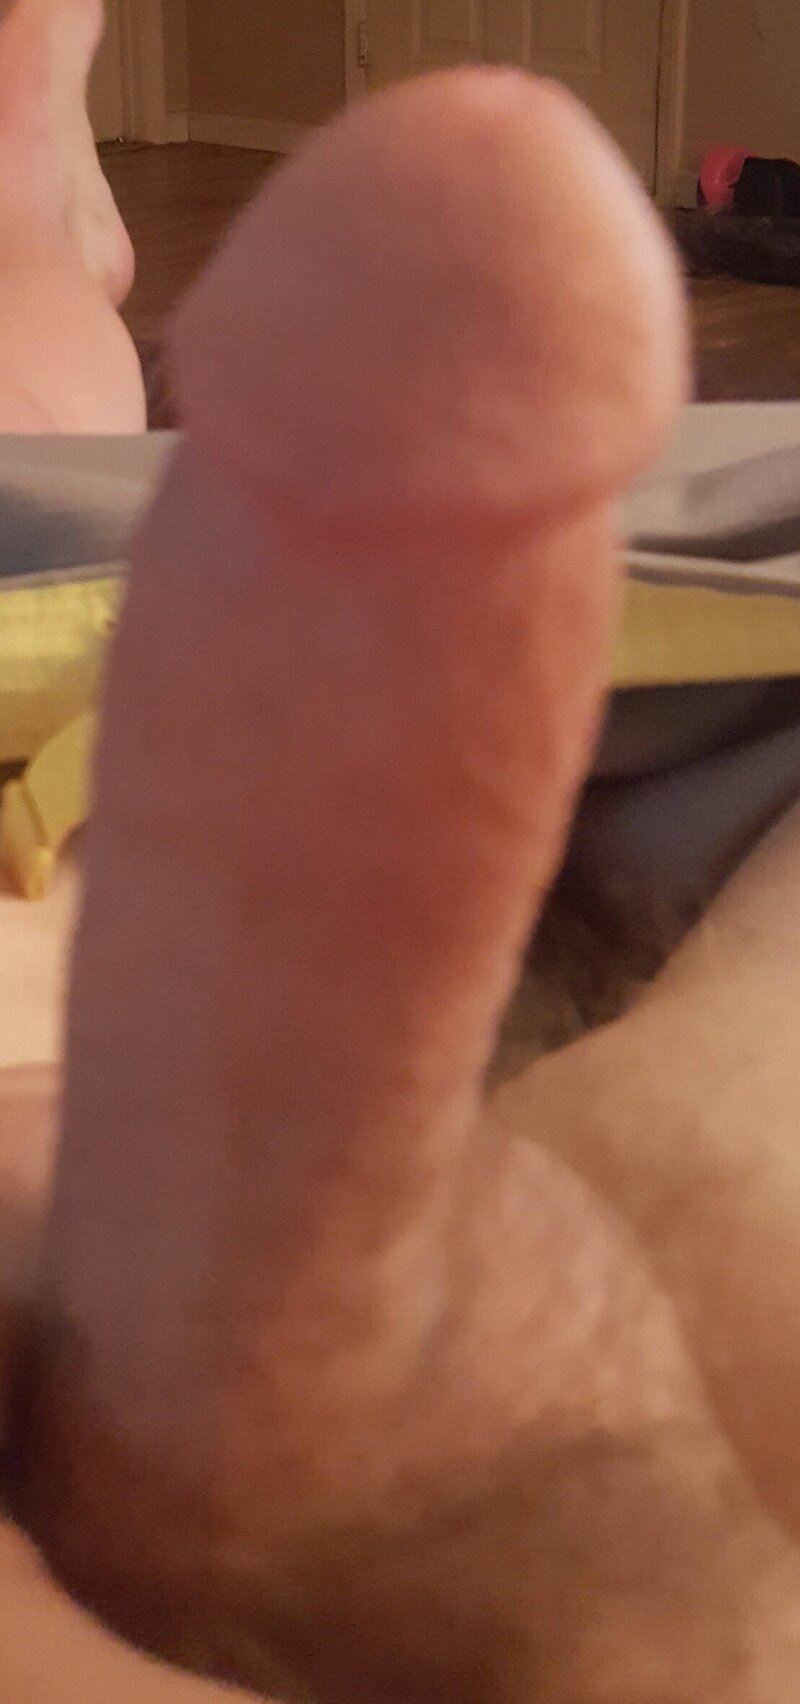 Just a pic of my dick. picture